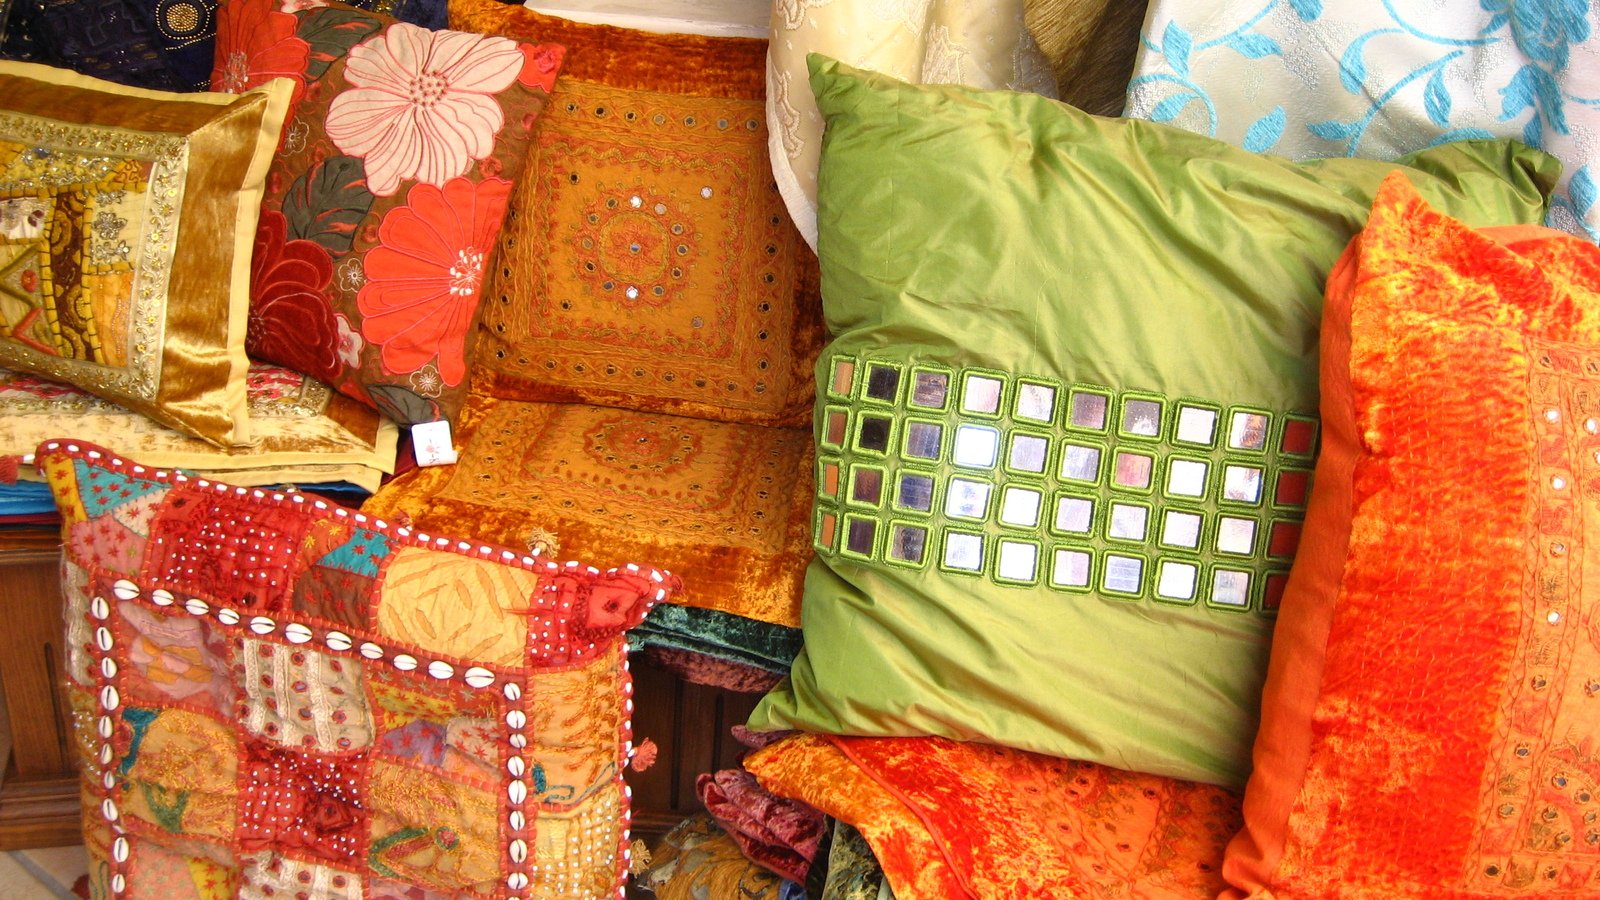 several colorful pillows piled next to each other on the floor